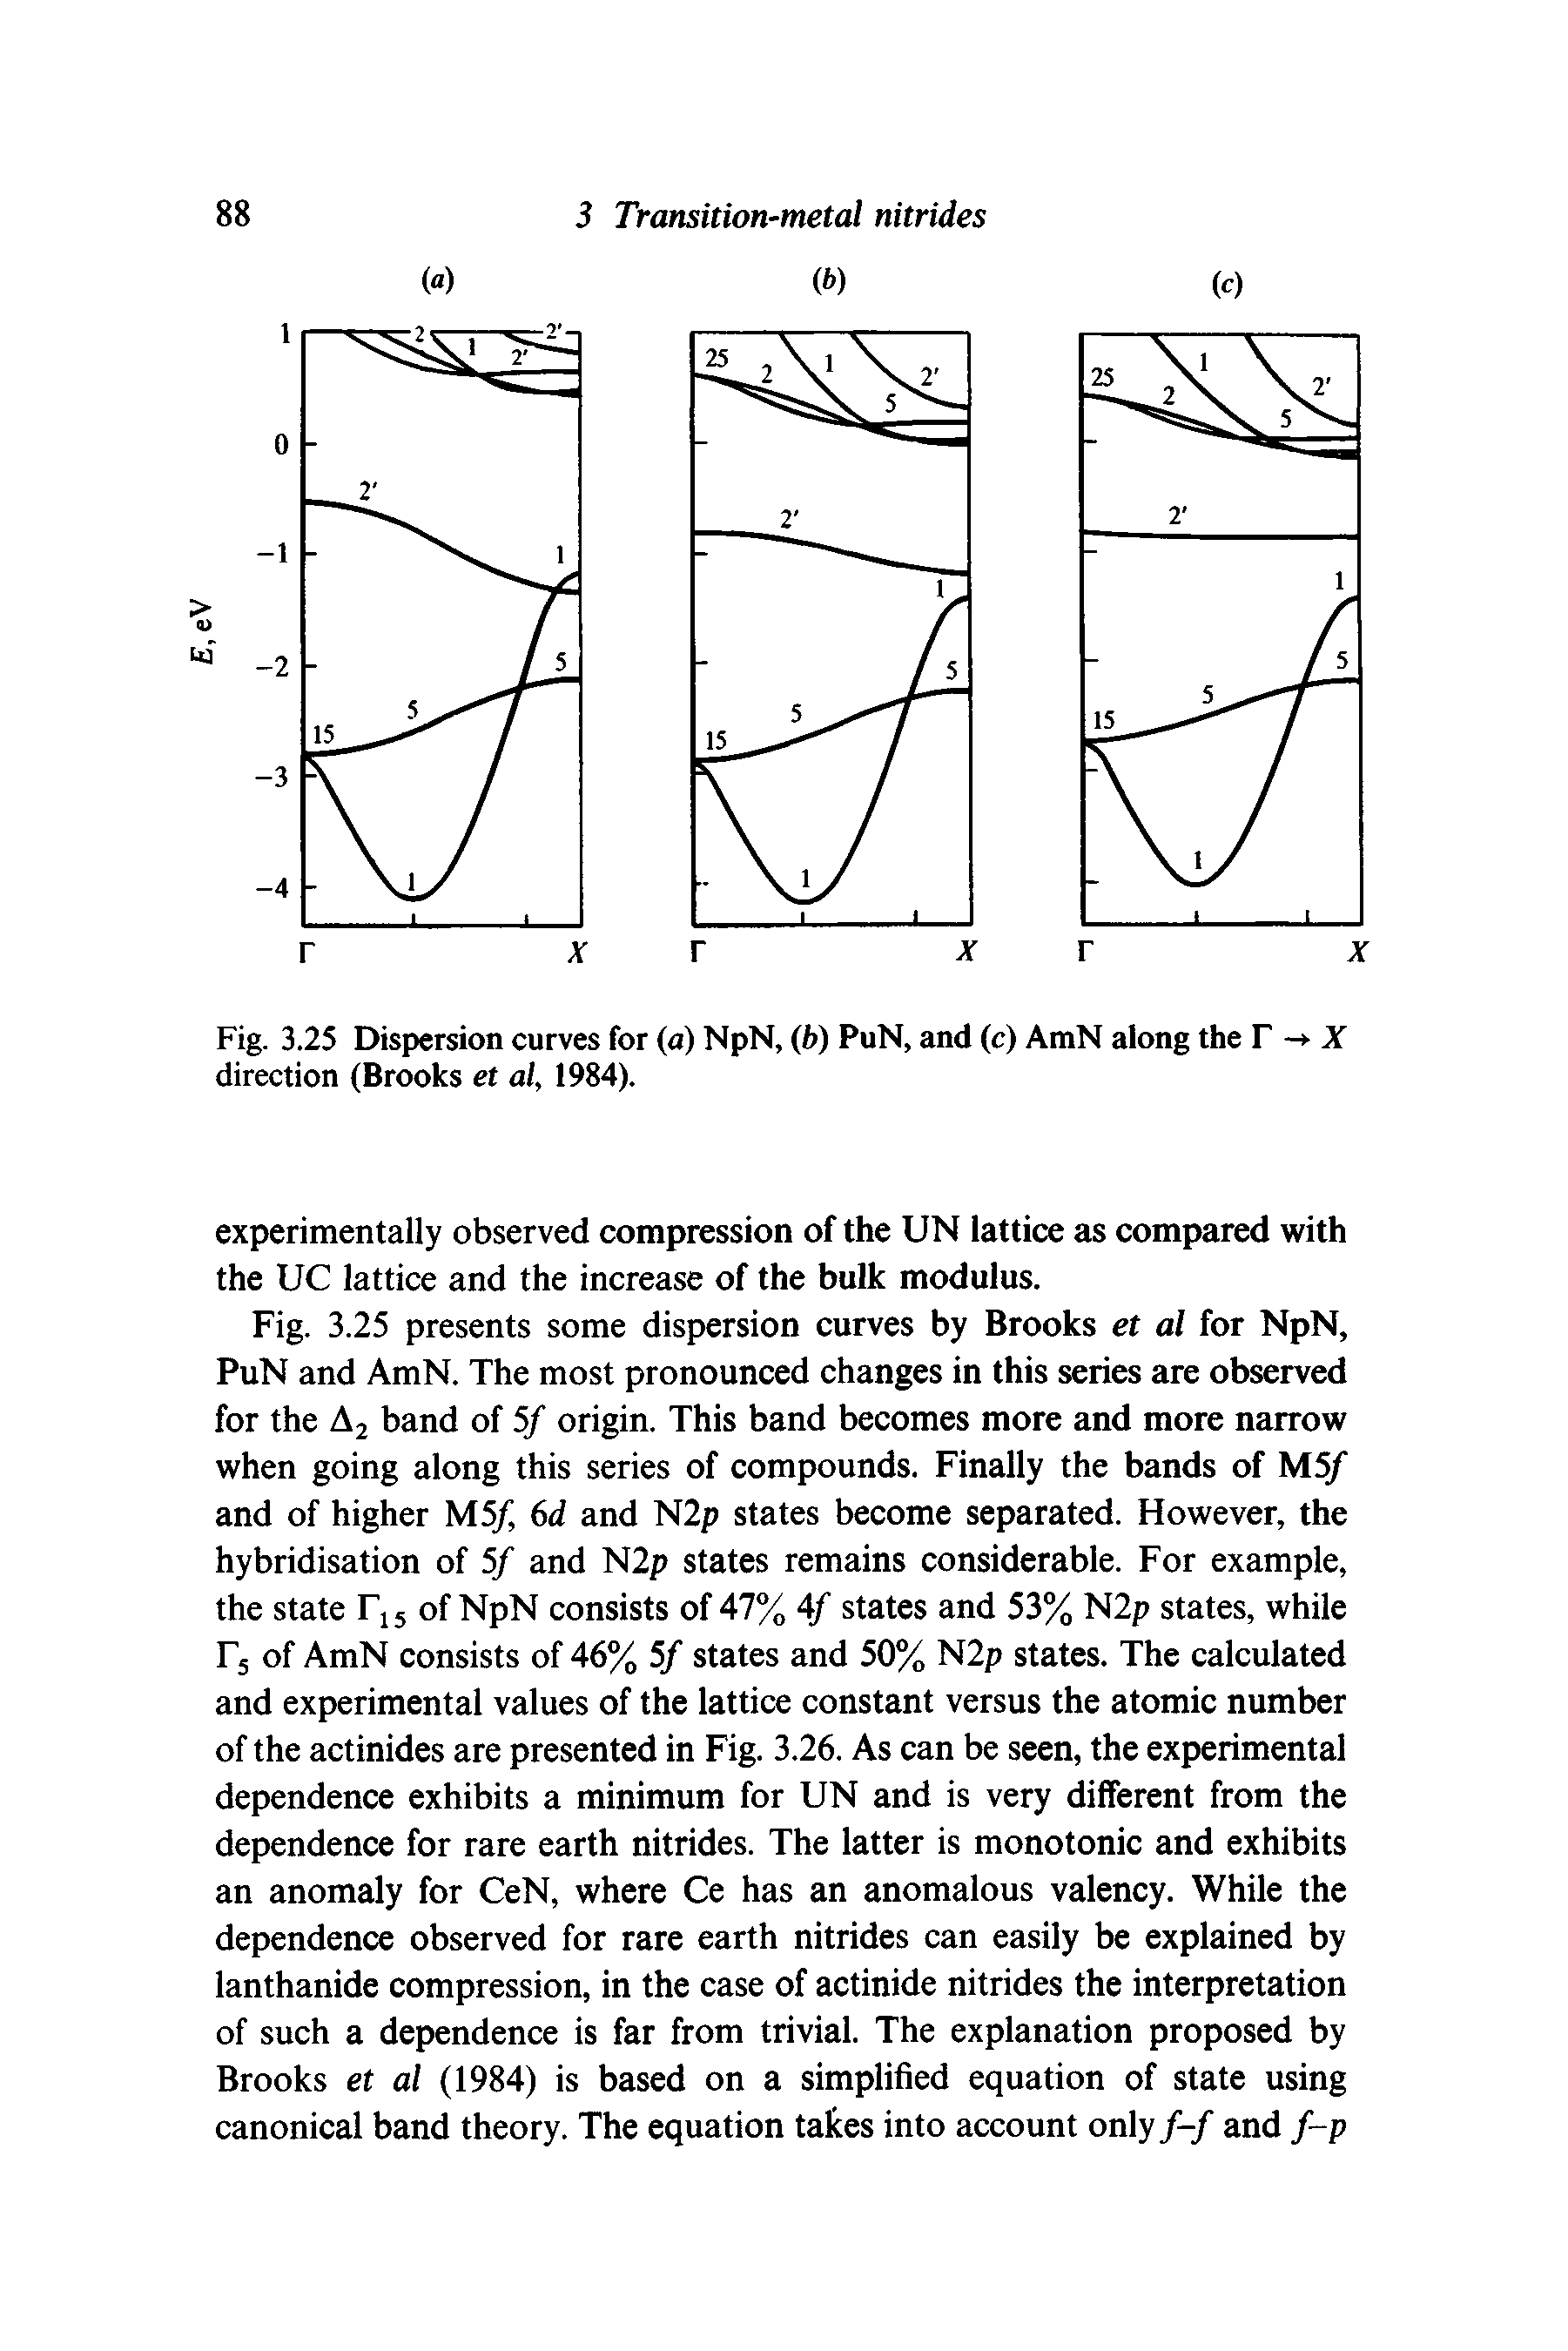 Fig. 3.25 presents some dispersion curves by Brooks et al for NpN, PuN and AmN. The most pronounced changes in this series are observed for the Aj band of 5/ origin. This band becomes more and more narrow when going along this series of compounds. Finally the bands of M5/ and of higher M5/, 6d and N2p states become separated. However, the hybridisation of 5/ and N2p states remains considerable. For example, the state Tjs of NpN consists of 47% df states and 53% N2p states, while Fj of AmN consists of 46% 5/ states and 50% N2p states. The calculated and experimental values of the lattice constant versus the atomic number of the actinides are presented in Fig. 3.26. As can be seen, the experimental dependence exhibits a minimum for UN and is very different from the dependence for rare earth nitrides. The latter is monotonic and exhibits an anomaly for CeN, where Ce has an anomalous valency. While the dependence observed for rare earth nitrides can easily be explained by lanthanide compression, in the case of actinide nitrides the interpretation of such a dependence is far from trivial. The explanation proposed by Brooks et al (1984) is based on a simplified equation of state using canonical band theory. The equation takes into account only /-/ and f-p...